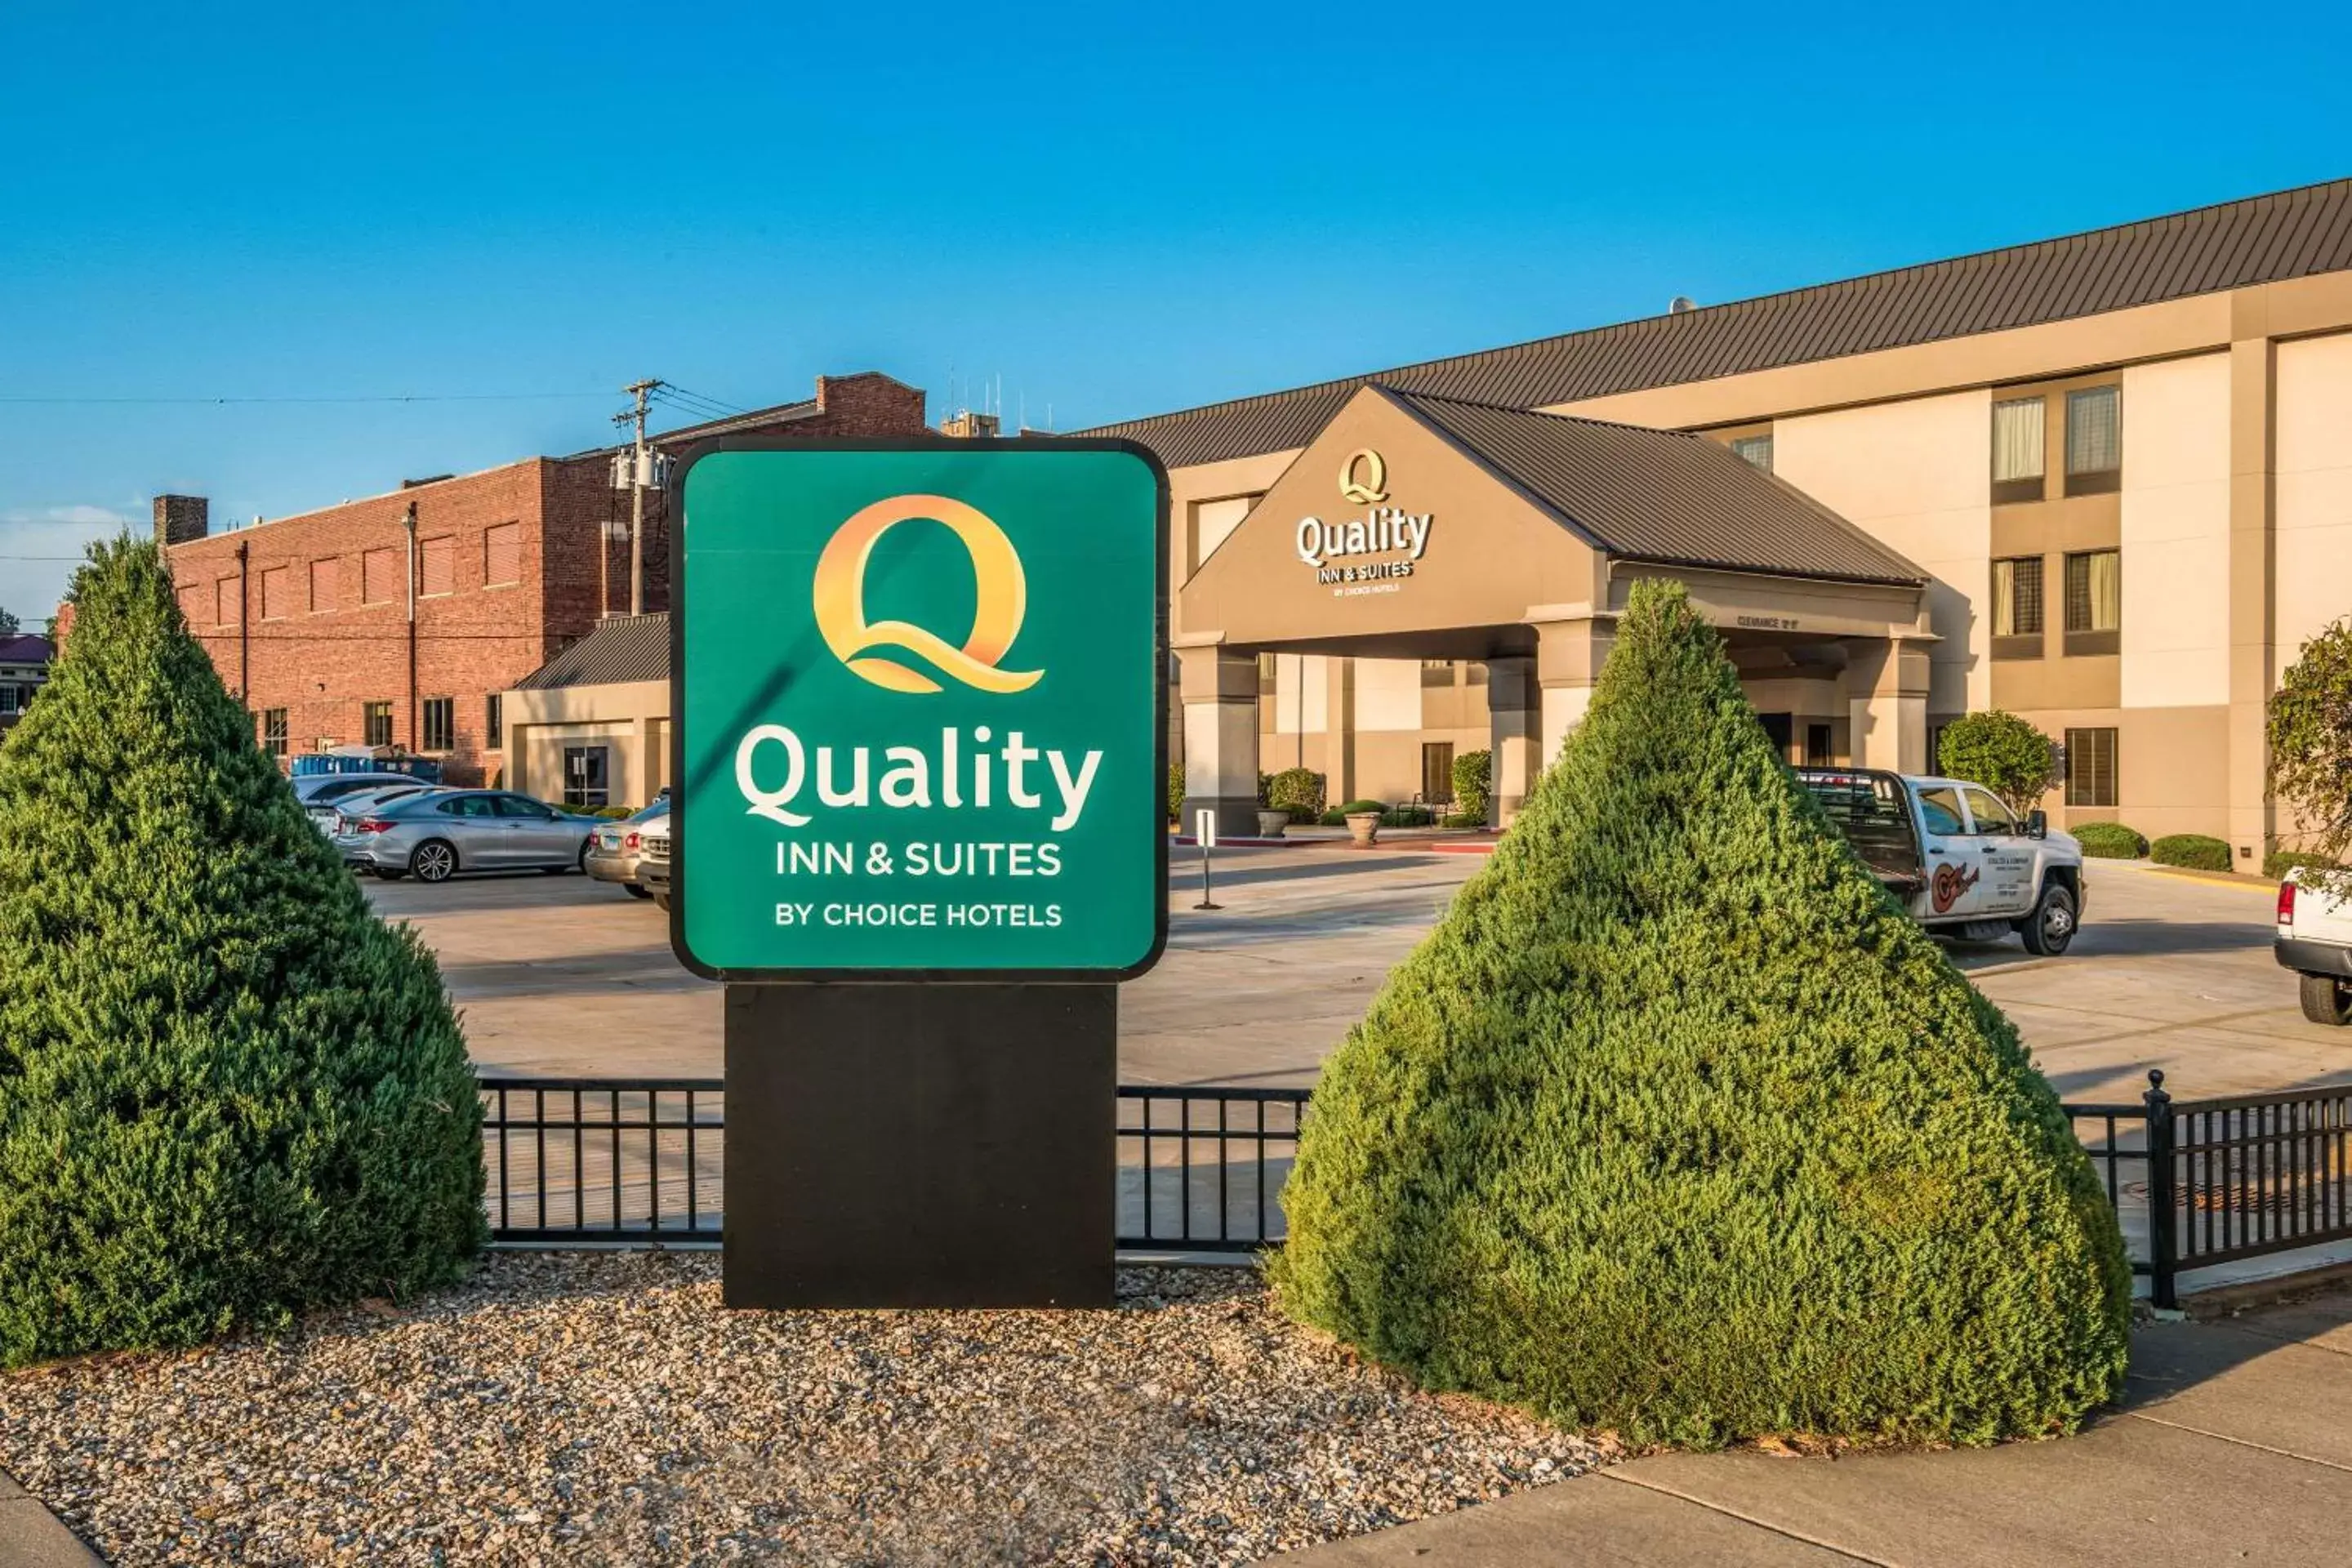 Property Building in Quality Inn & Suites Quincy - Downtown